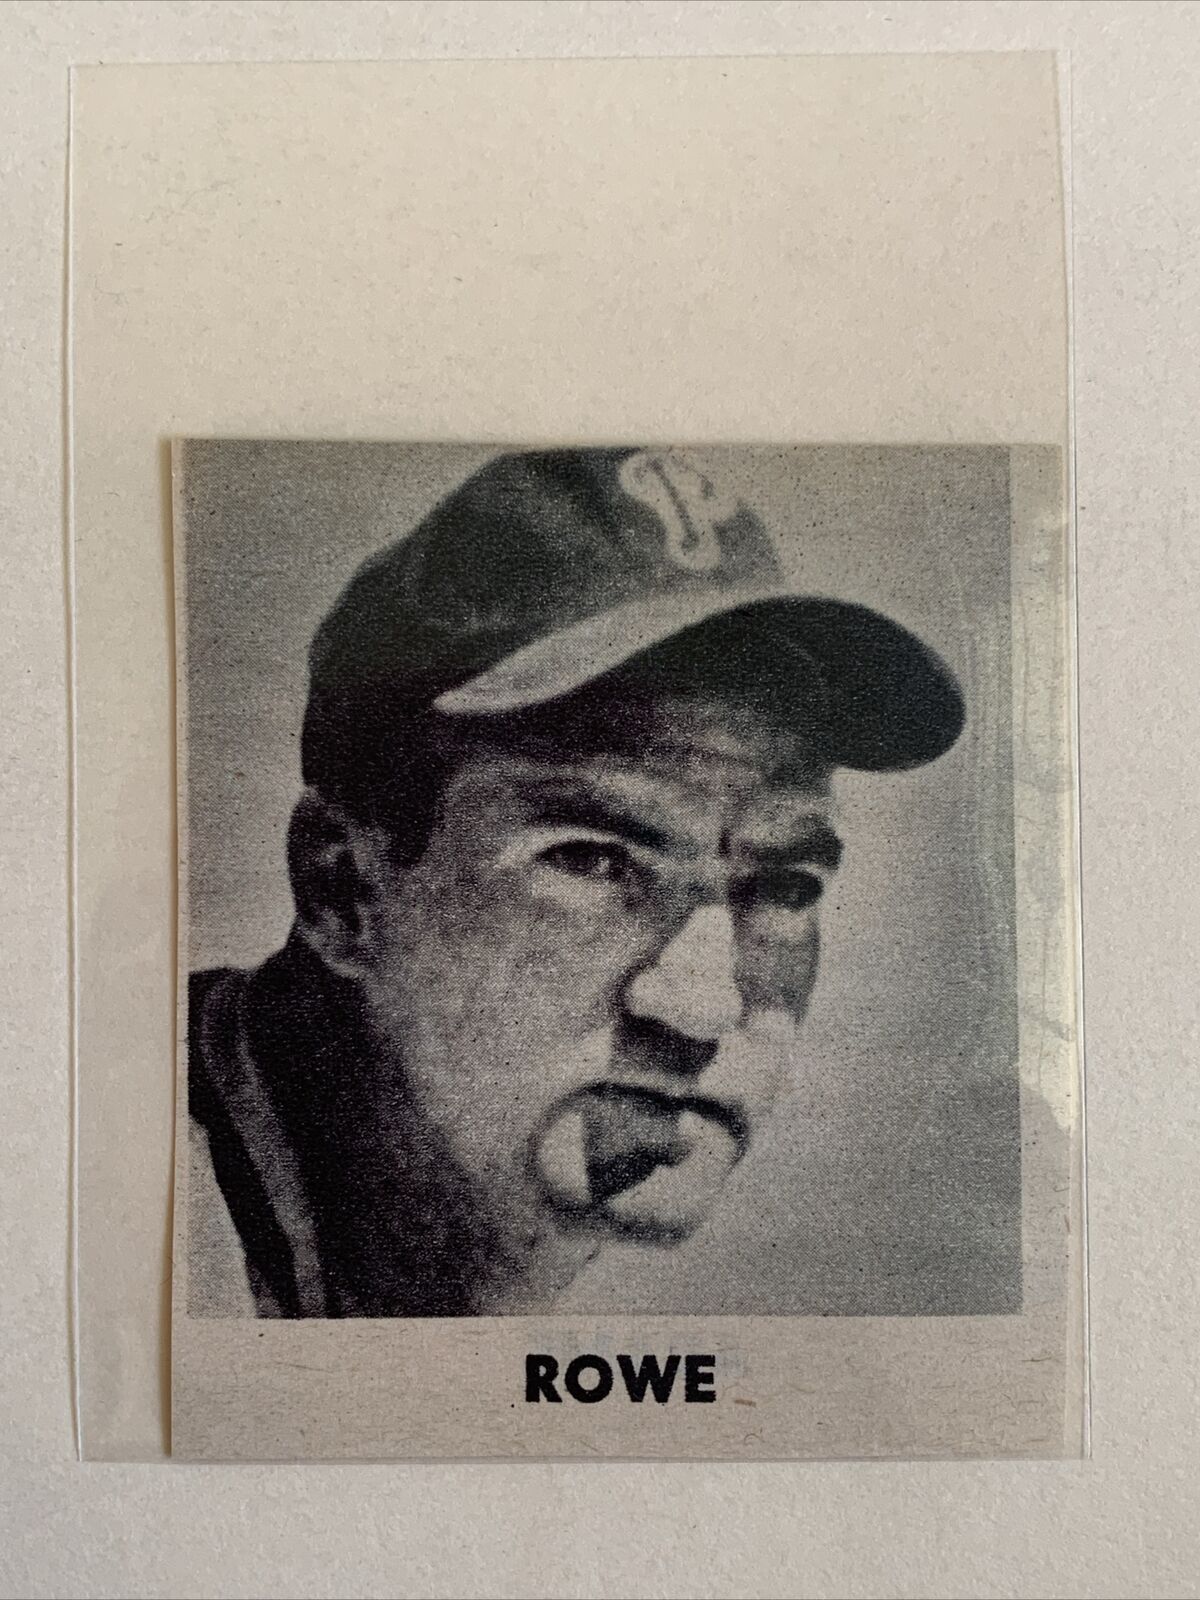 Schoolboy Rowe Bobby Adams Phillies Reds 1949 Complete Featured Baseball Panel